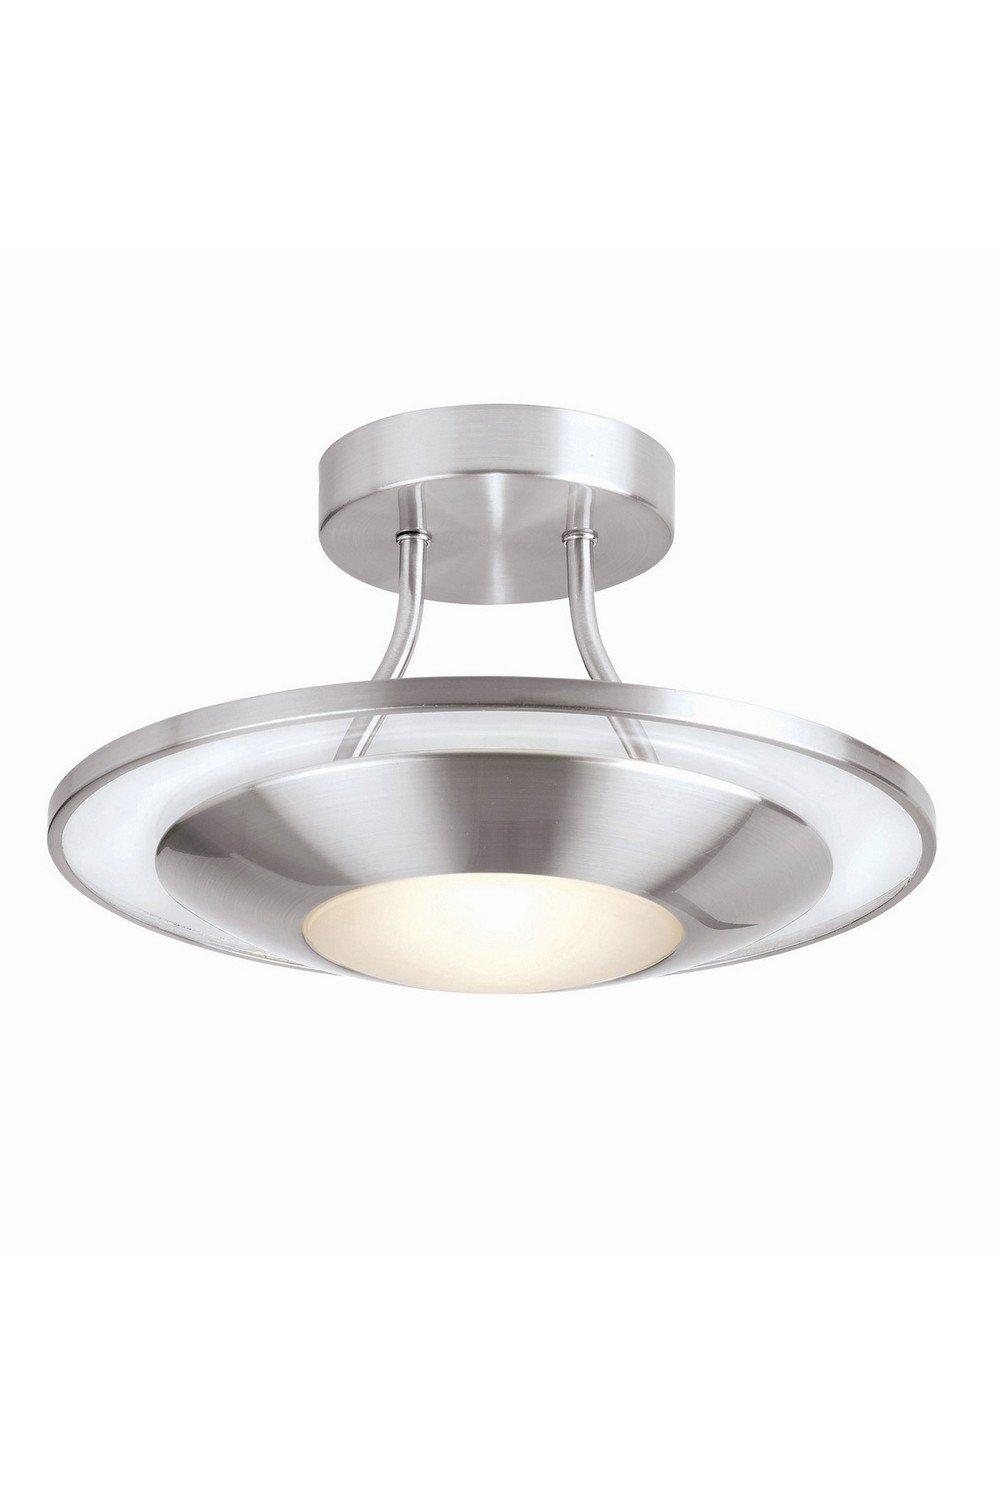 Firenz 1 Light Flush Ceiling Light Frosted Glass Satin Chrome with Clear